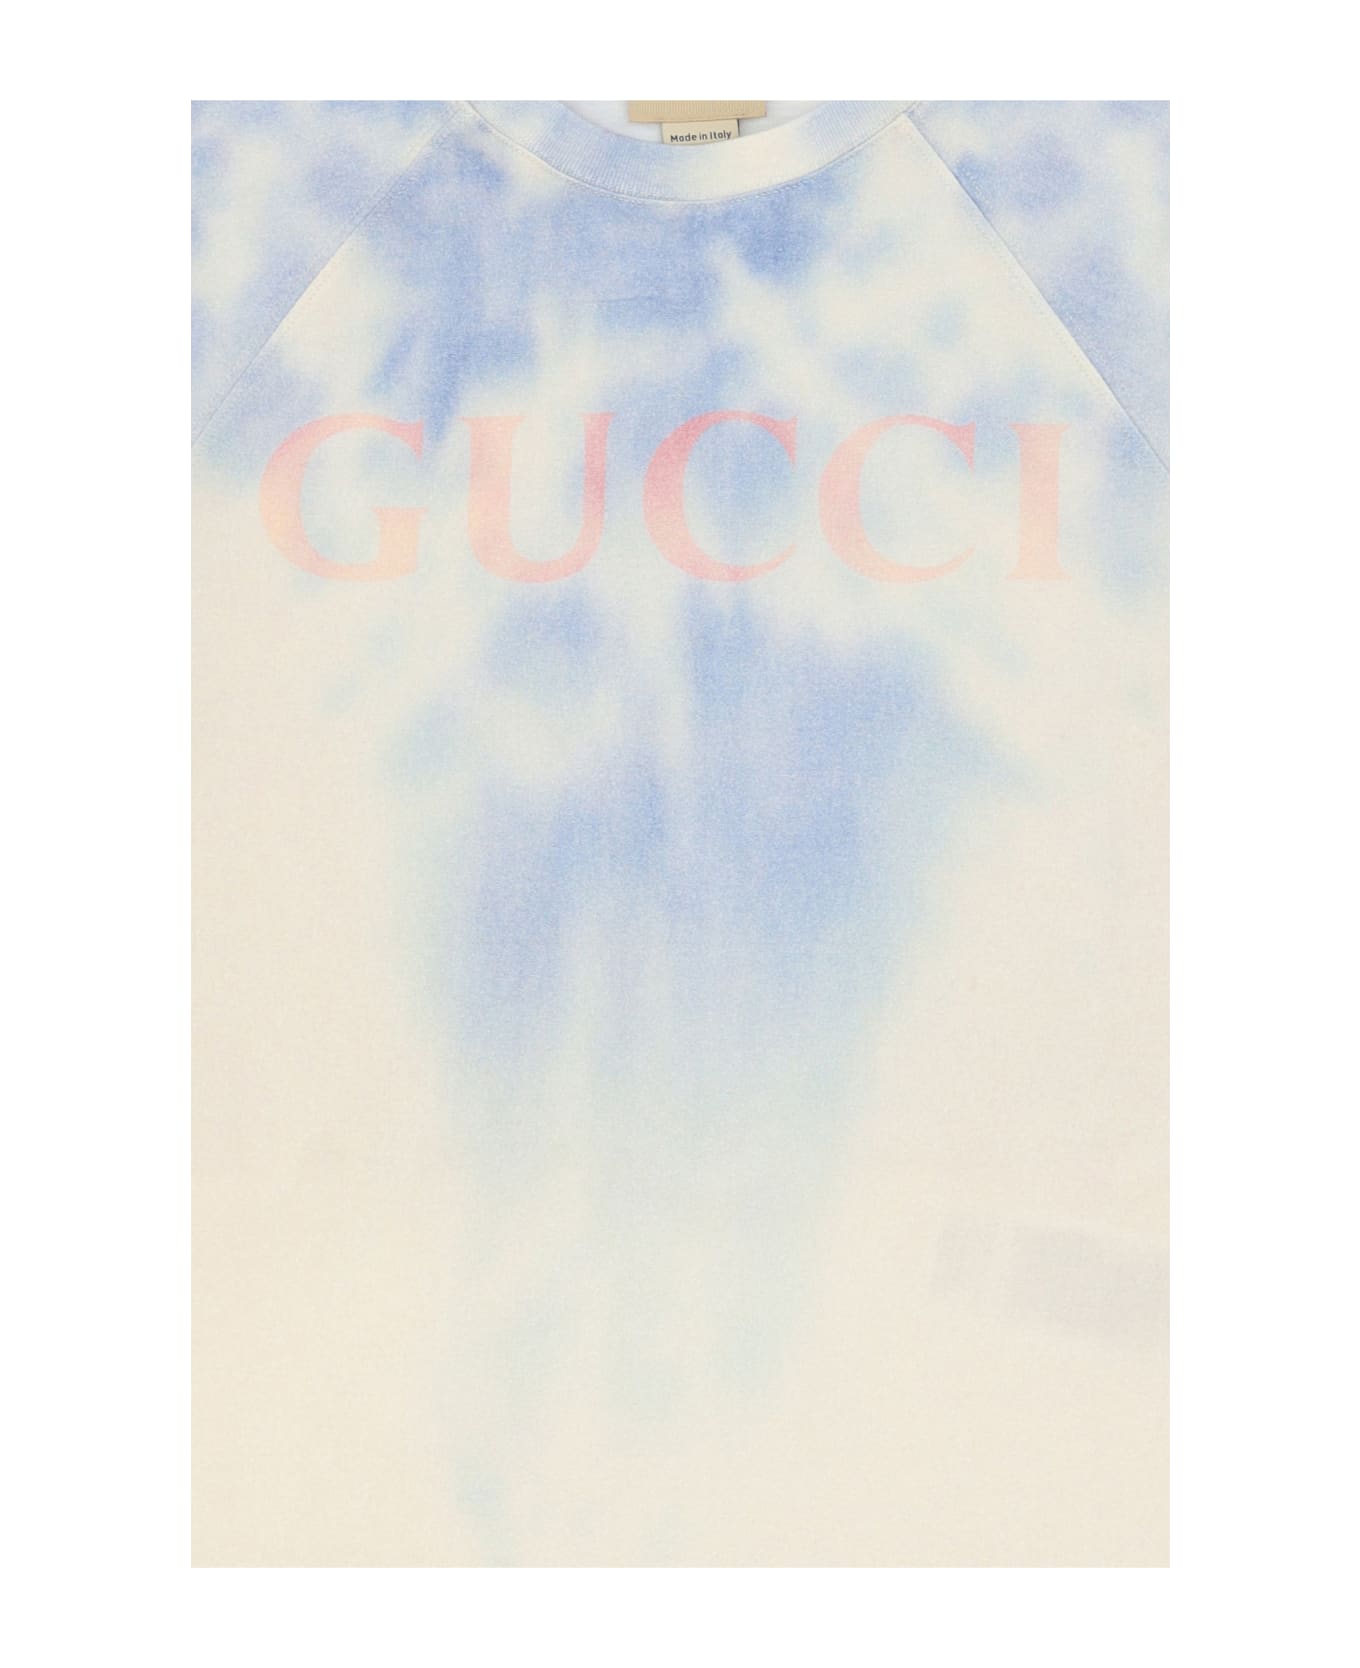 Gucci T-shirt For Boy - Dusty White/blue